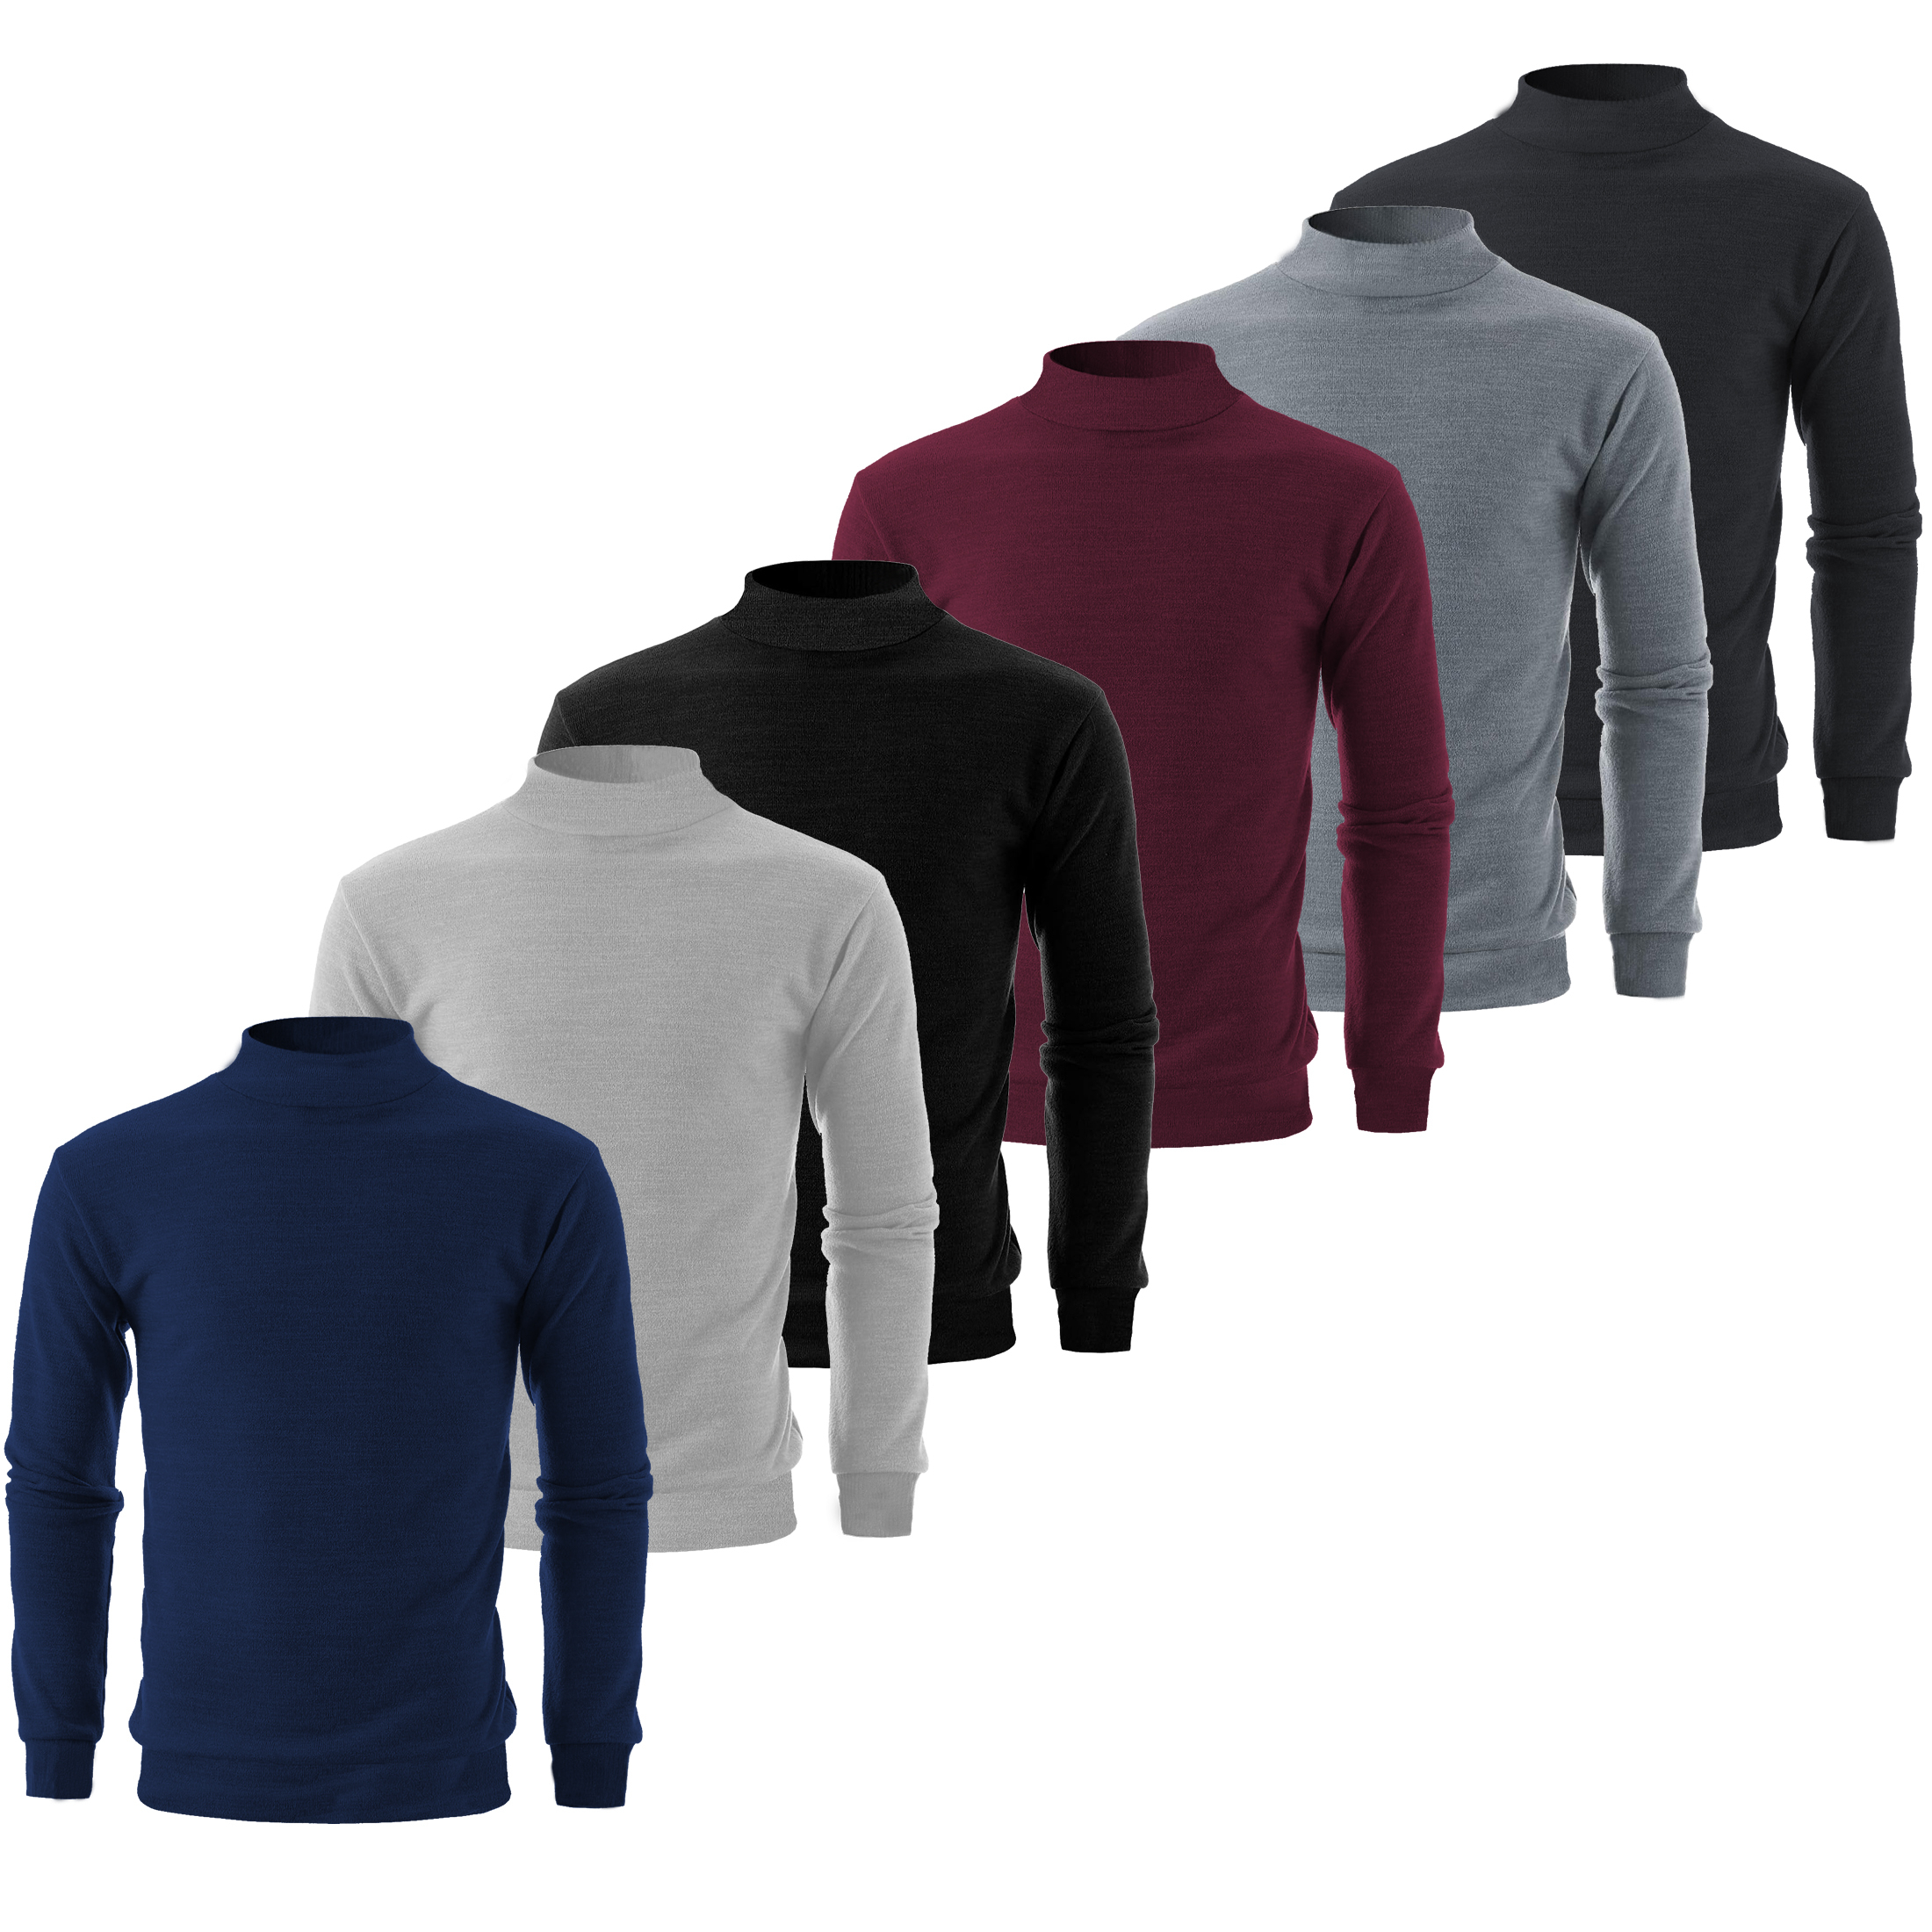 2 Pack:Men's Slim Fit Long Sleeve Casual Mock Neck Pullover Sweater - Small